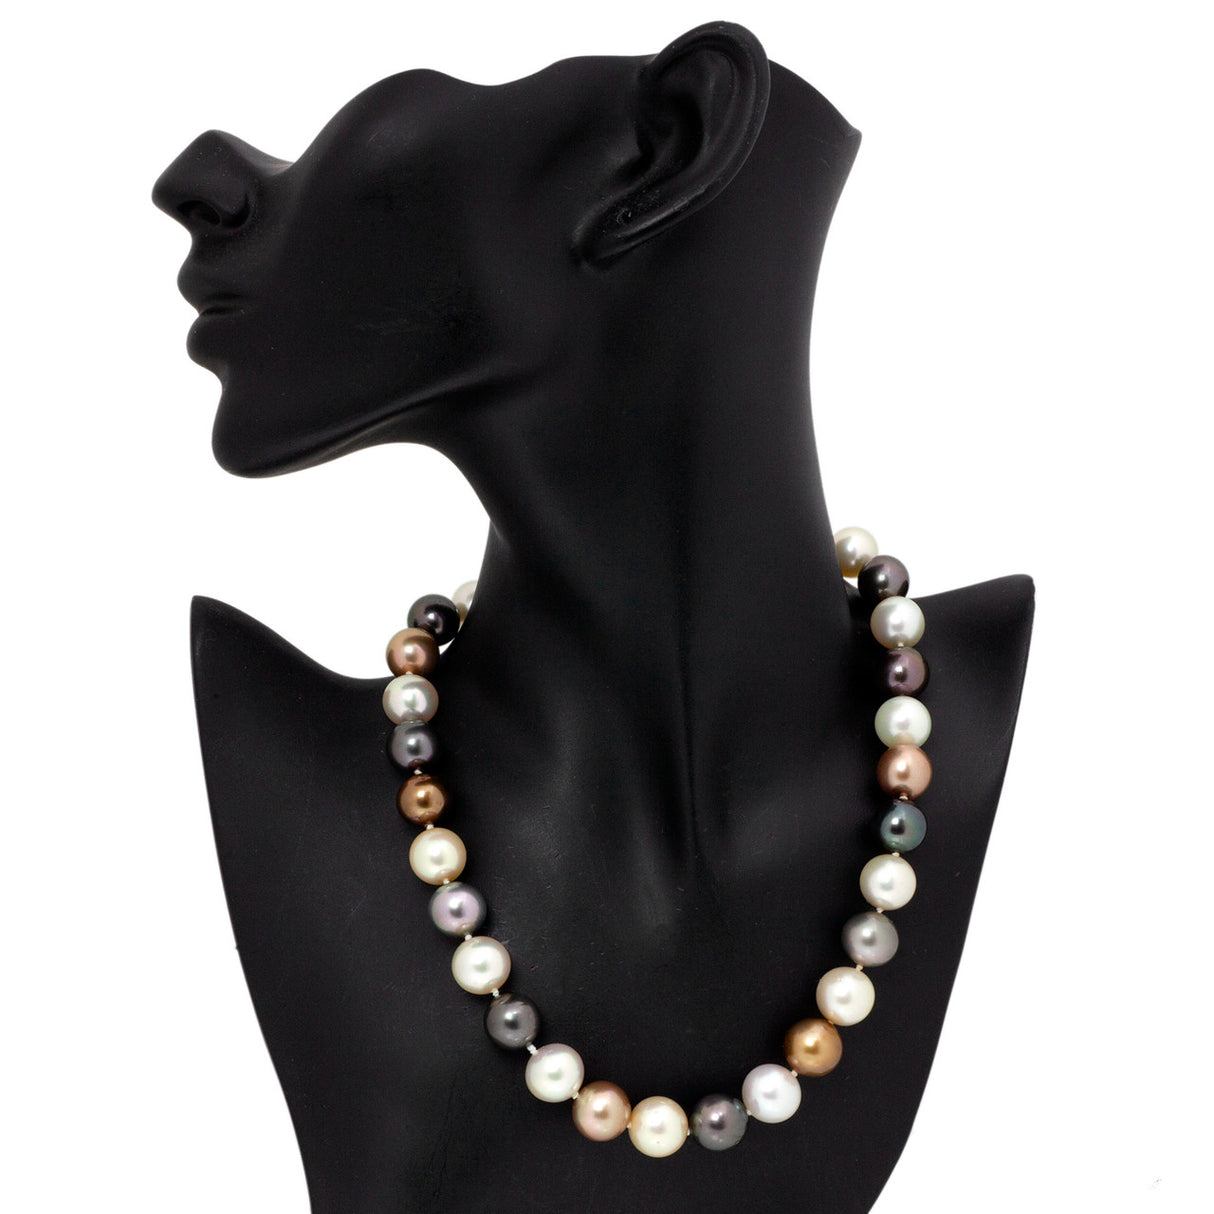 17" Tahitian Mixed Pearl Necklace